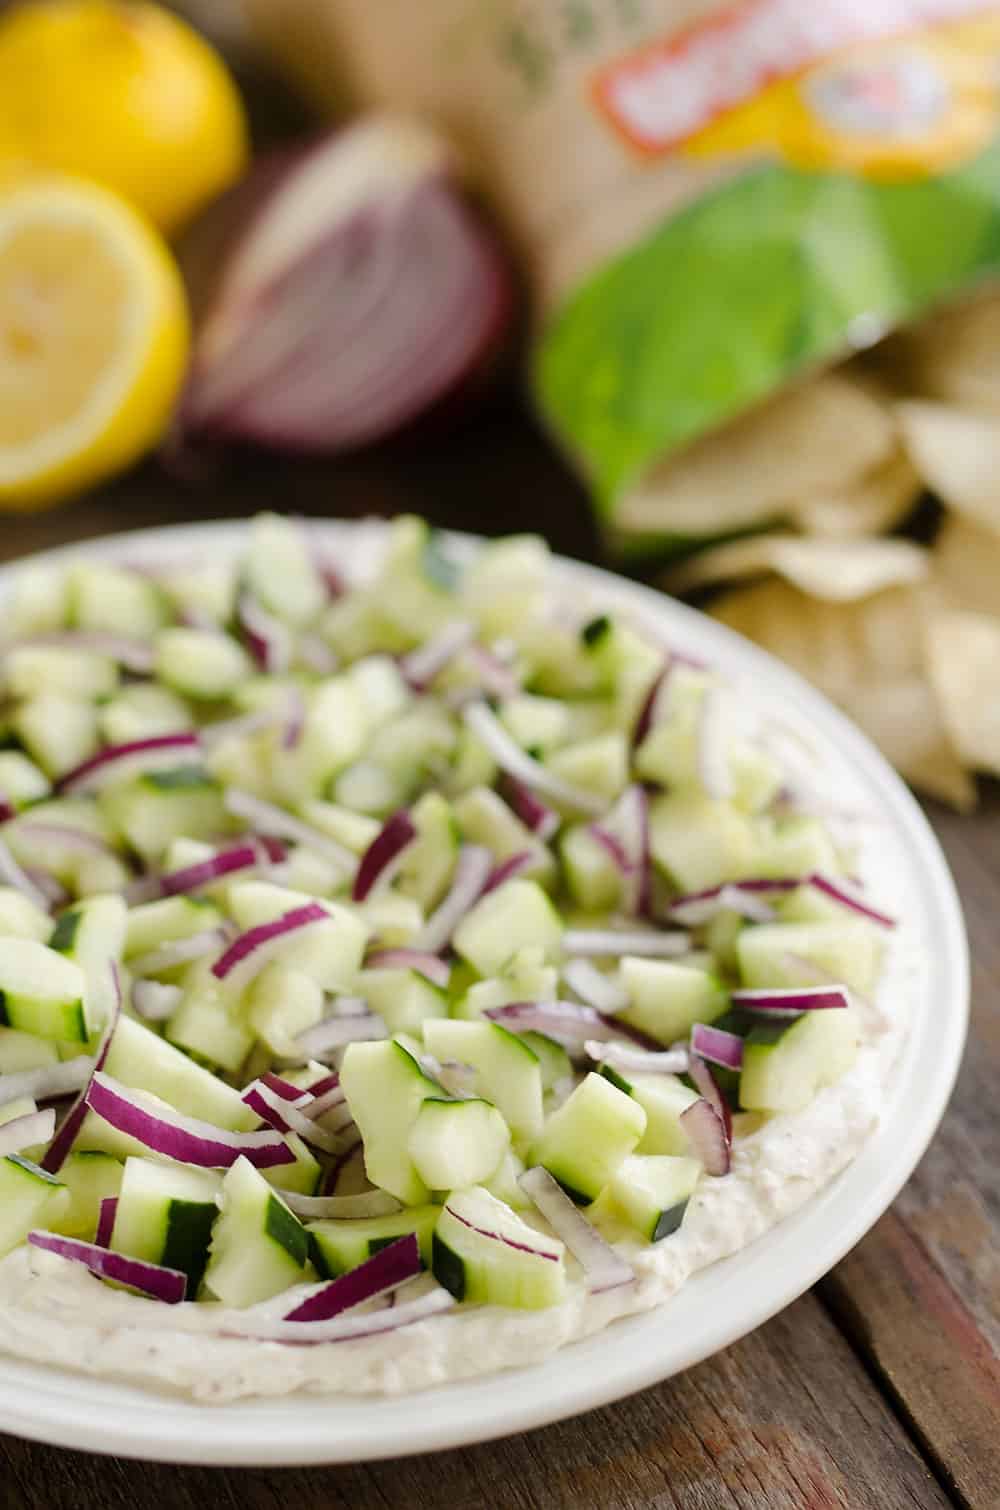 Creamy Cucumber Layered Dip is an easy 10 minute recipe perfect for a flavorful summer snack. A lightened up layer of creamy goodness is topped with fresh cucumbers and onions and served with Mission Organics Tortilla Chips for a wholesome dish you will love!